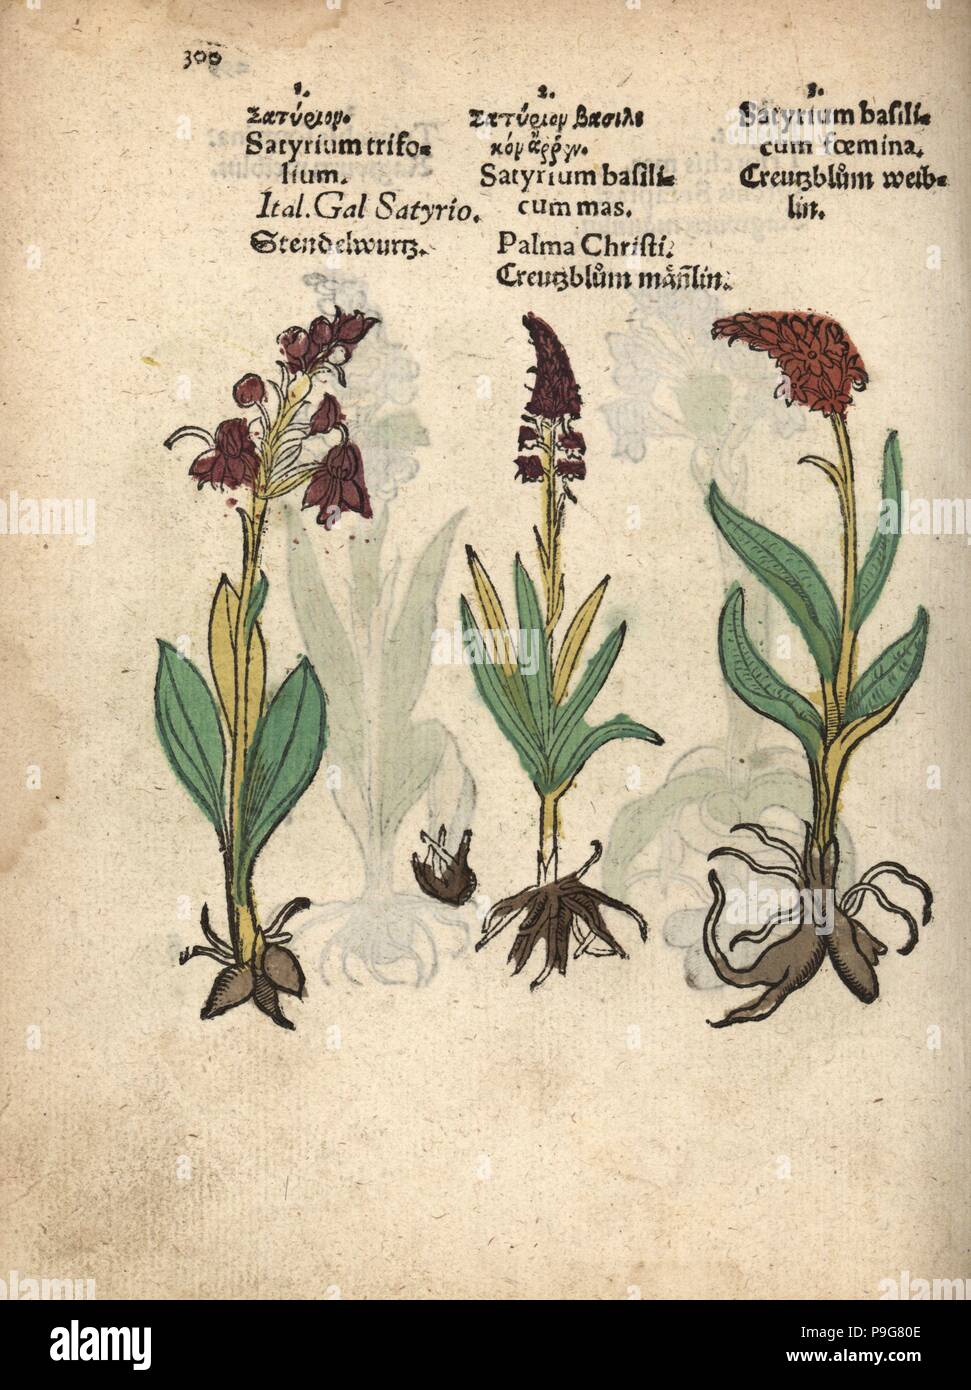 Lesser butterfly orchid, Platanthera bifolia, fragrant orchid, Gymnadenia conopsea, and spotted orchid, Dactylorhiza fuchsii. Handcoloured woodblock engraving of a botanical illustration from Adam Lonicer's Krauterbuch, or Herbal, Frankfurt, 1557. This from a 17th century pirate edition or atlas of illustrations only, with captions in Latin, Greek, French, Italian, German, and in English manuscript. Stock Photo